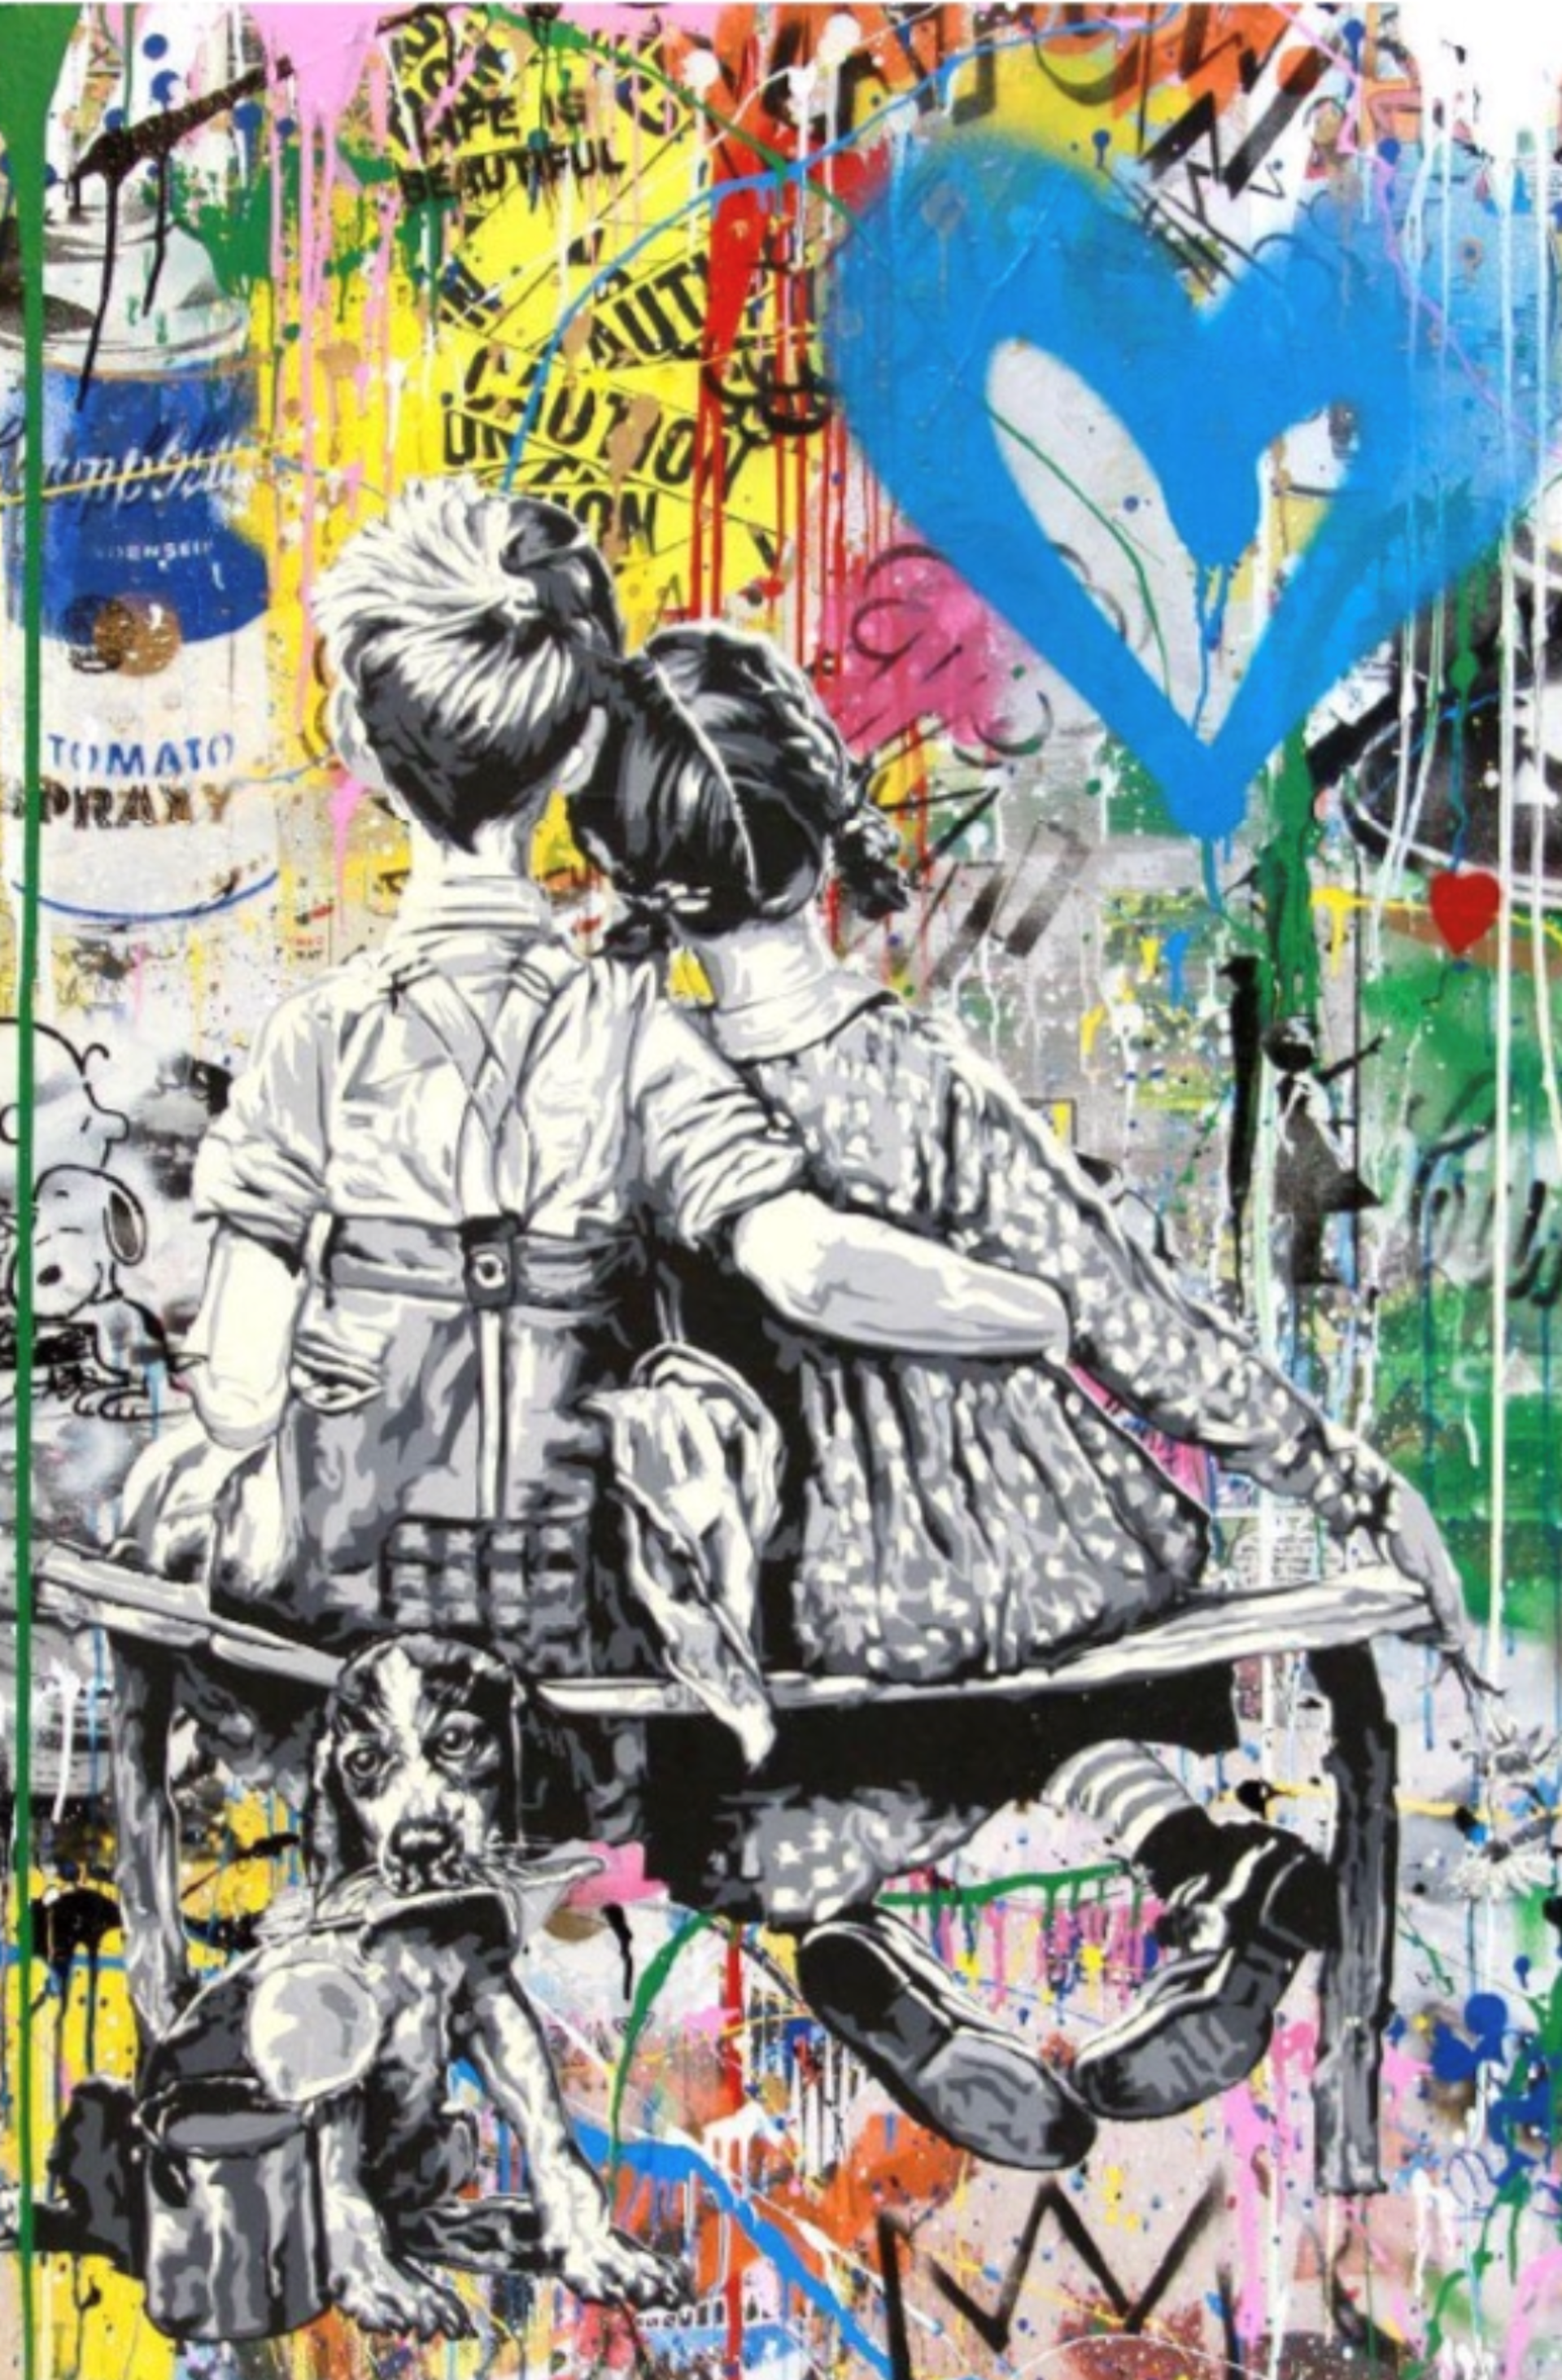 Work Well Together- SOLD Commissions Available Upon Request by Mr. Brainwash